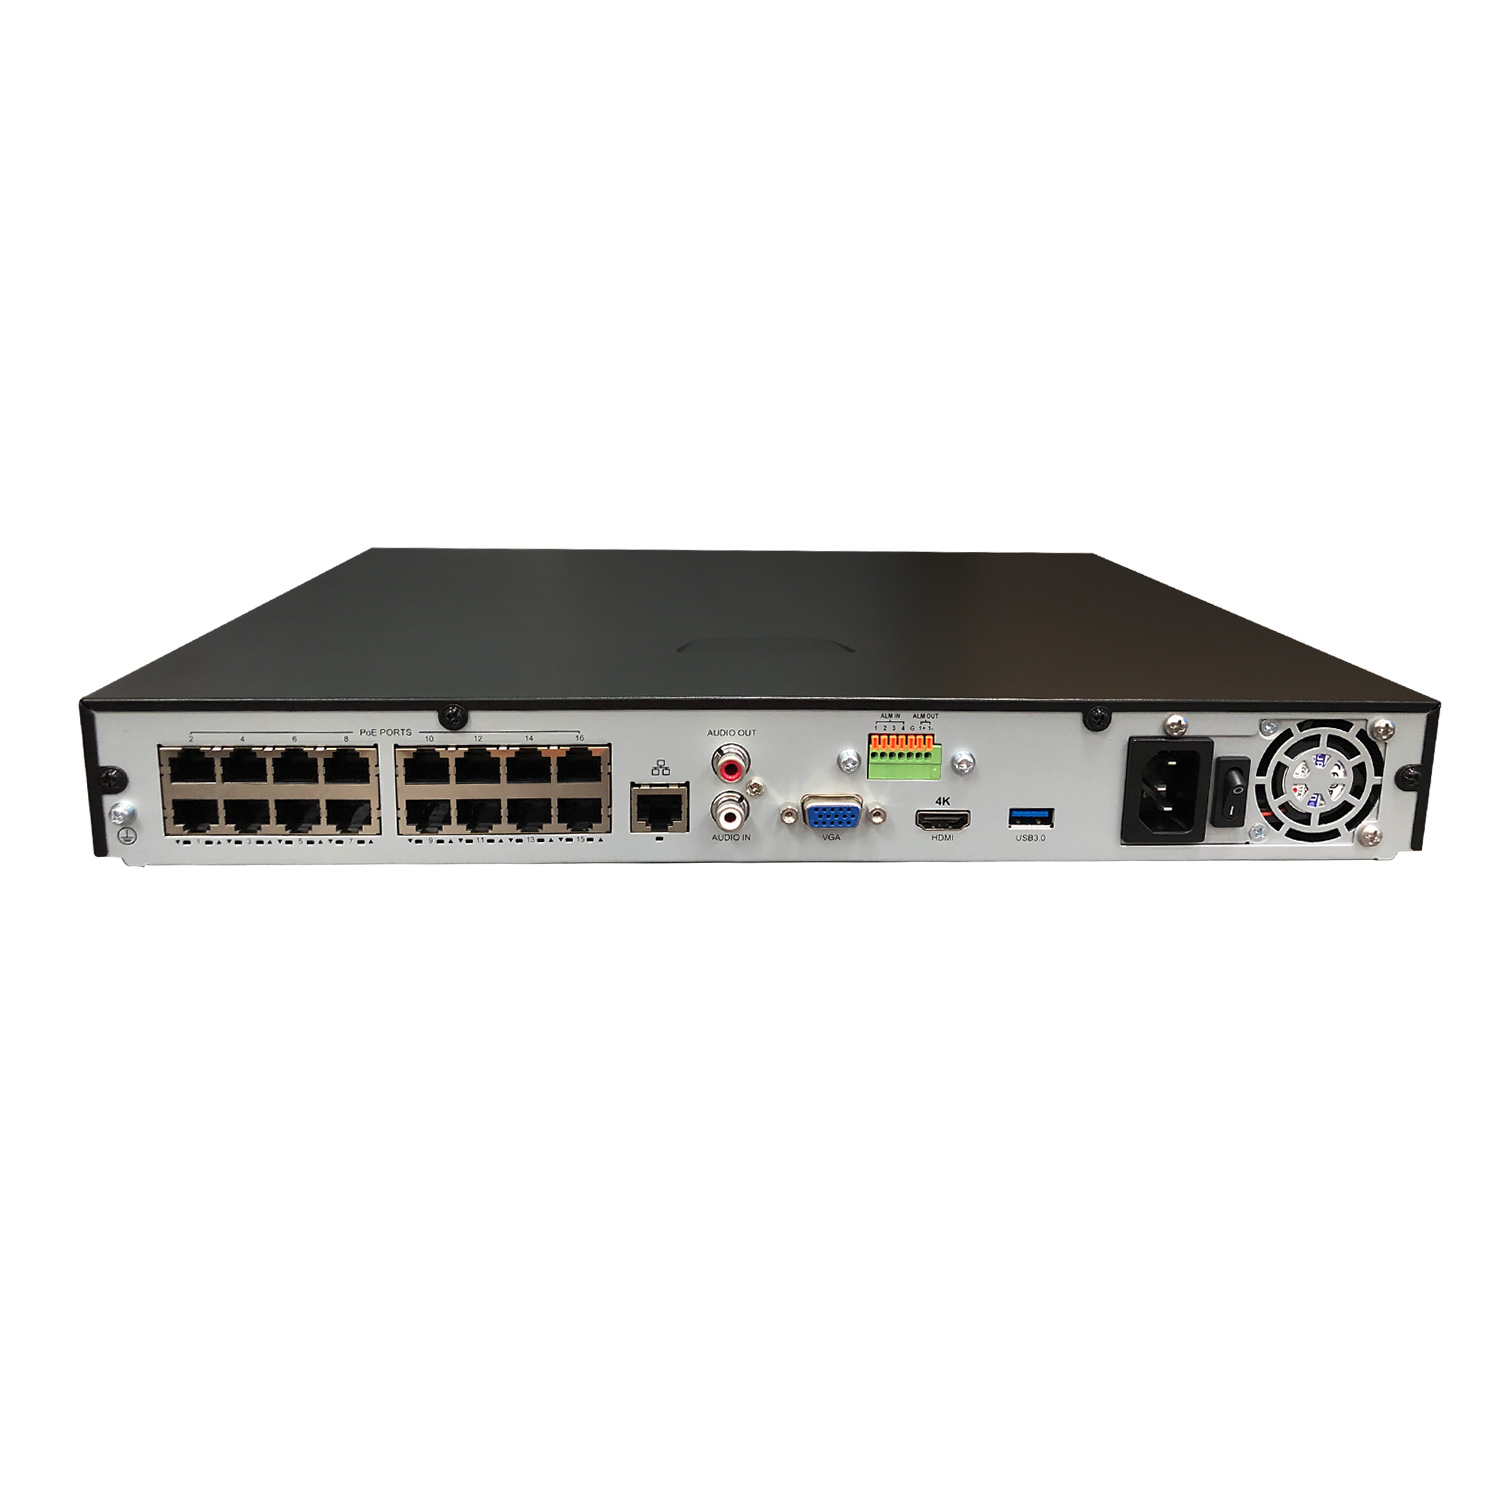 16-CHANNEL NETWORK VIDEO NVR RECORDER WITH PoE - Gyration